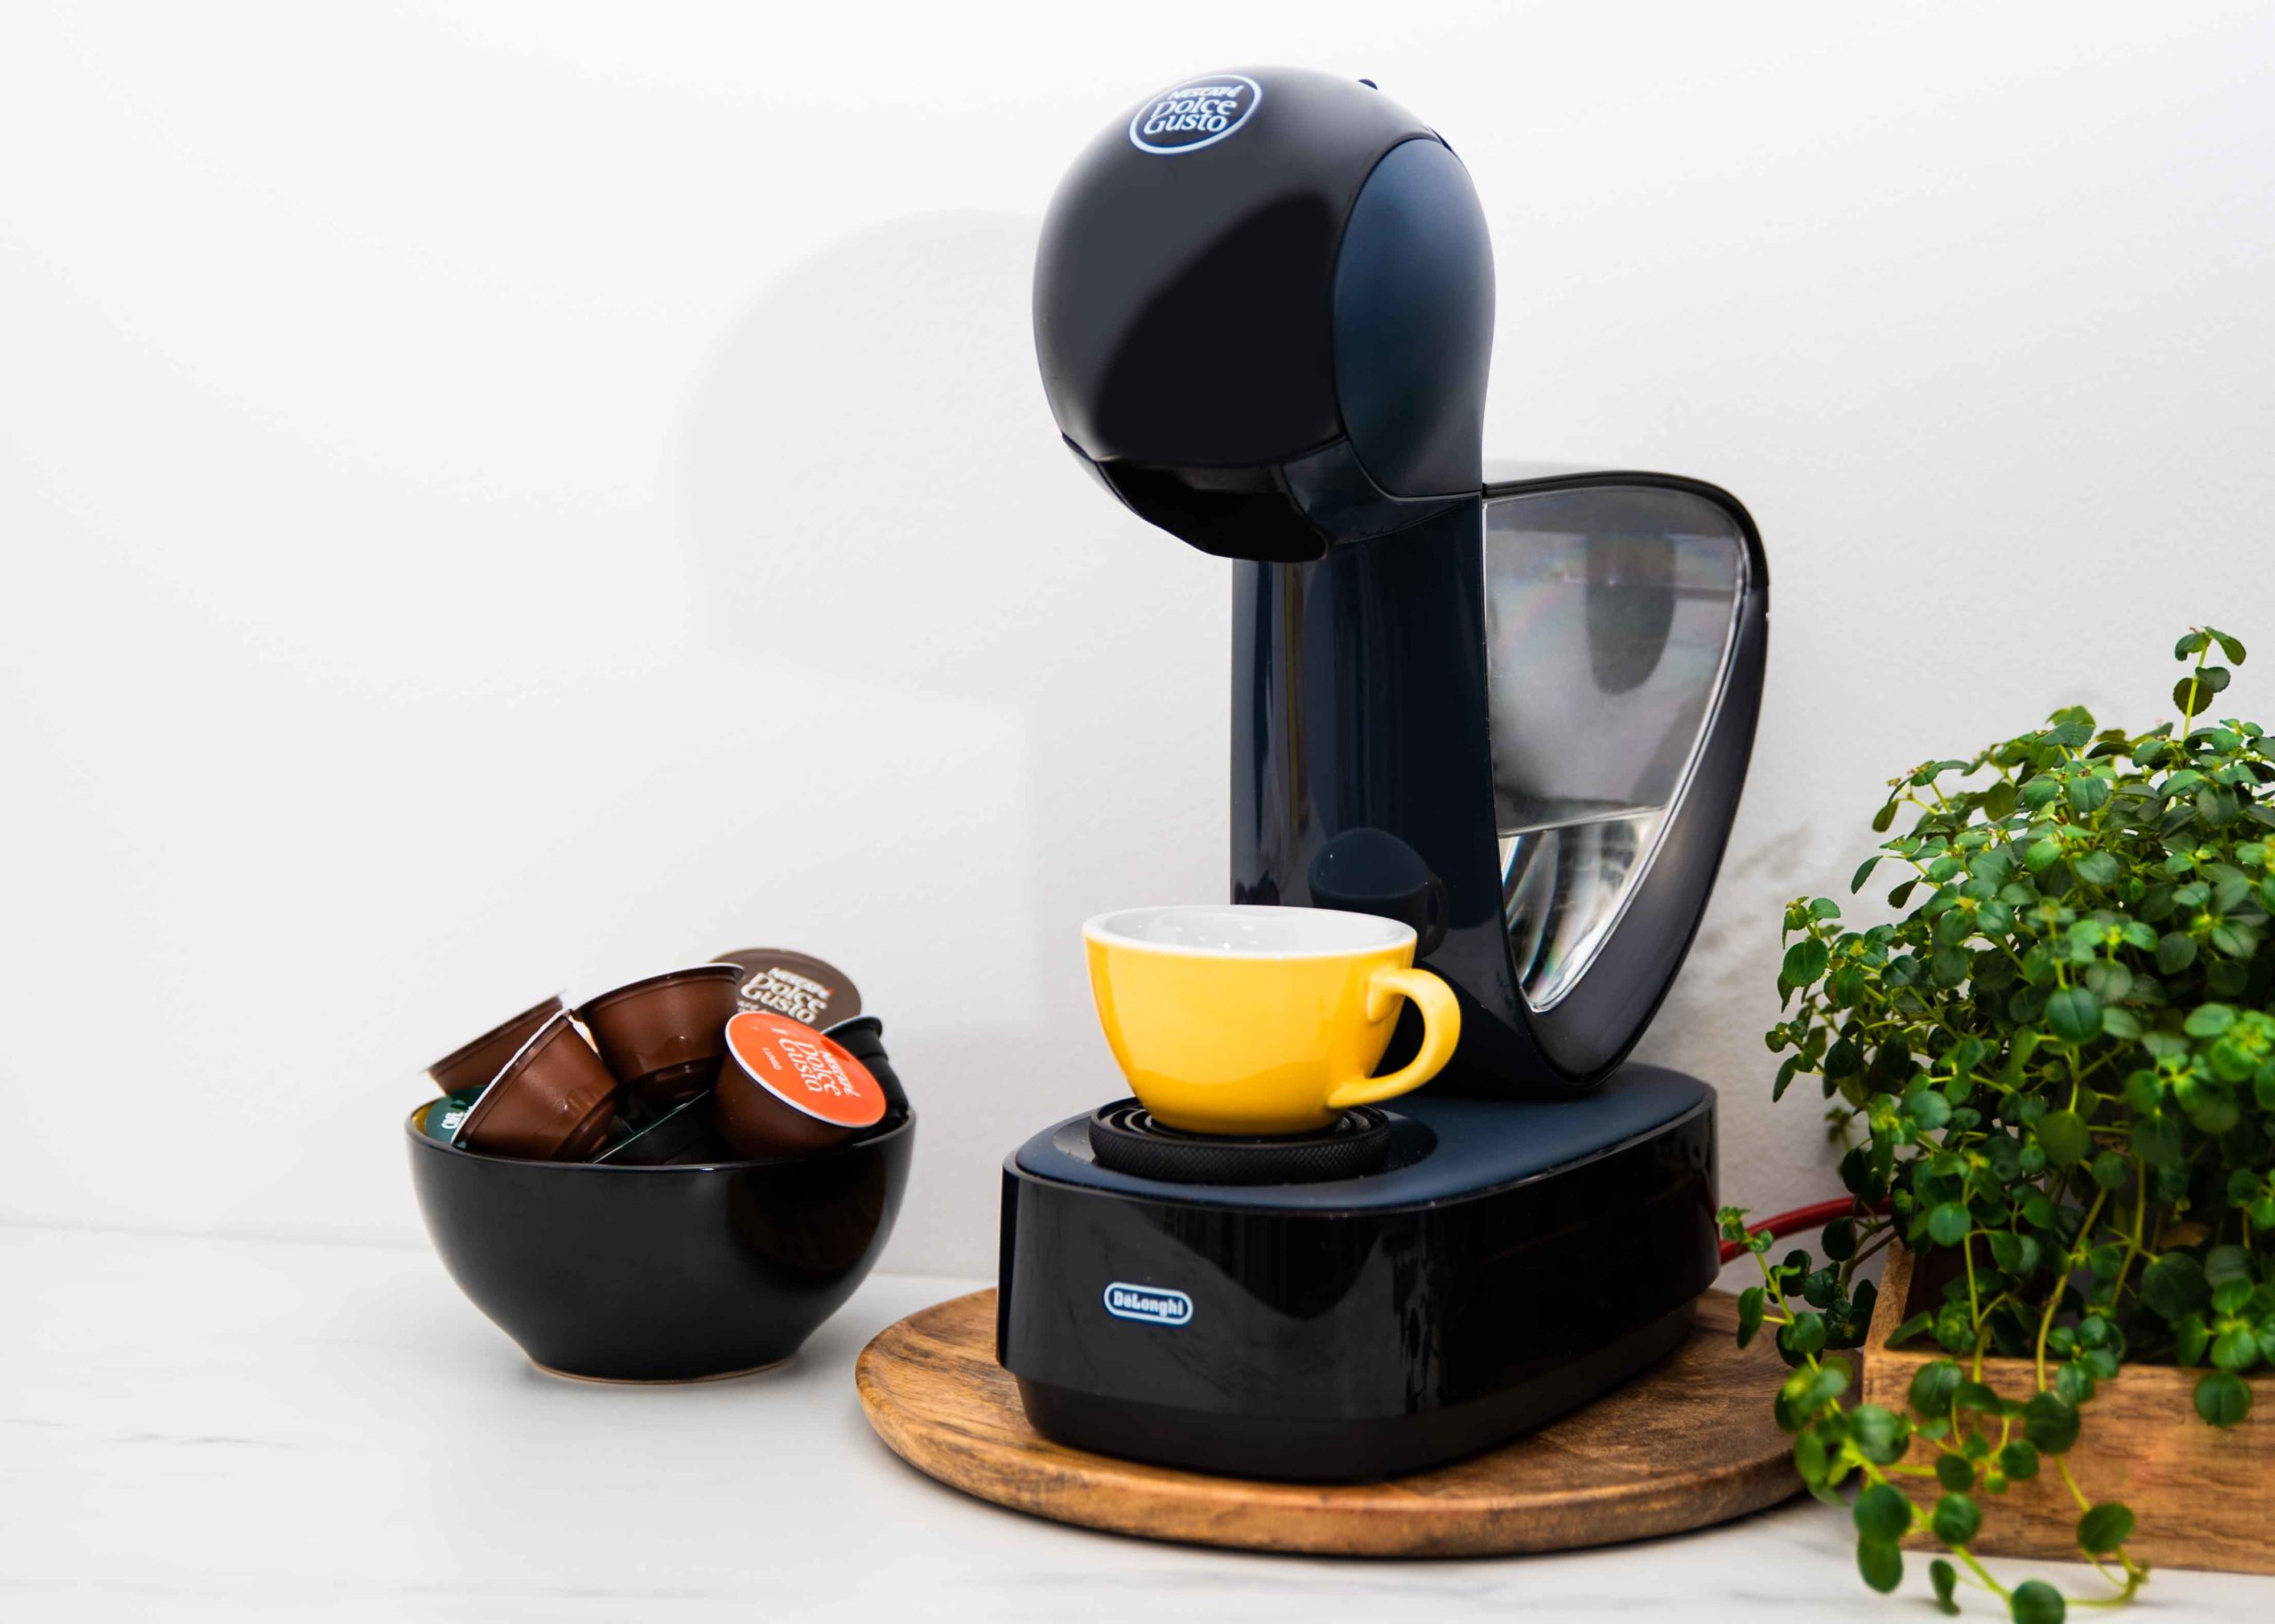 De'Longhi  Rinse & Descale: Cleaning Home Coffee Machines